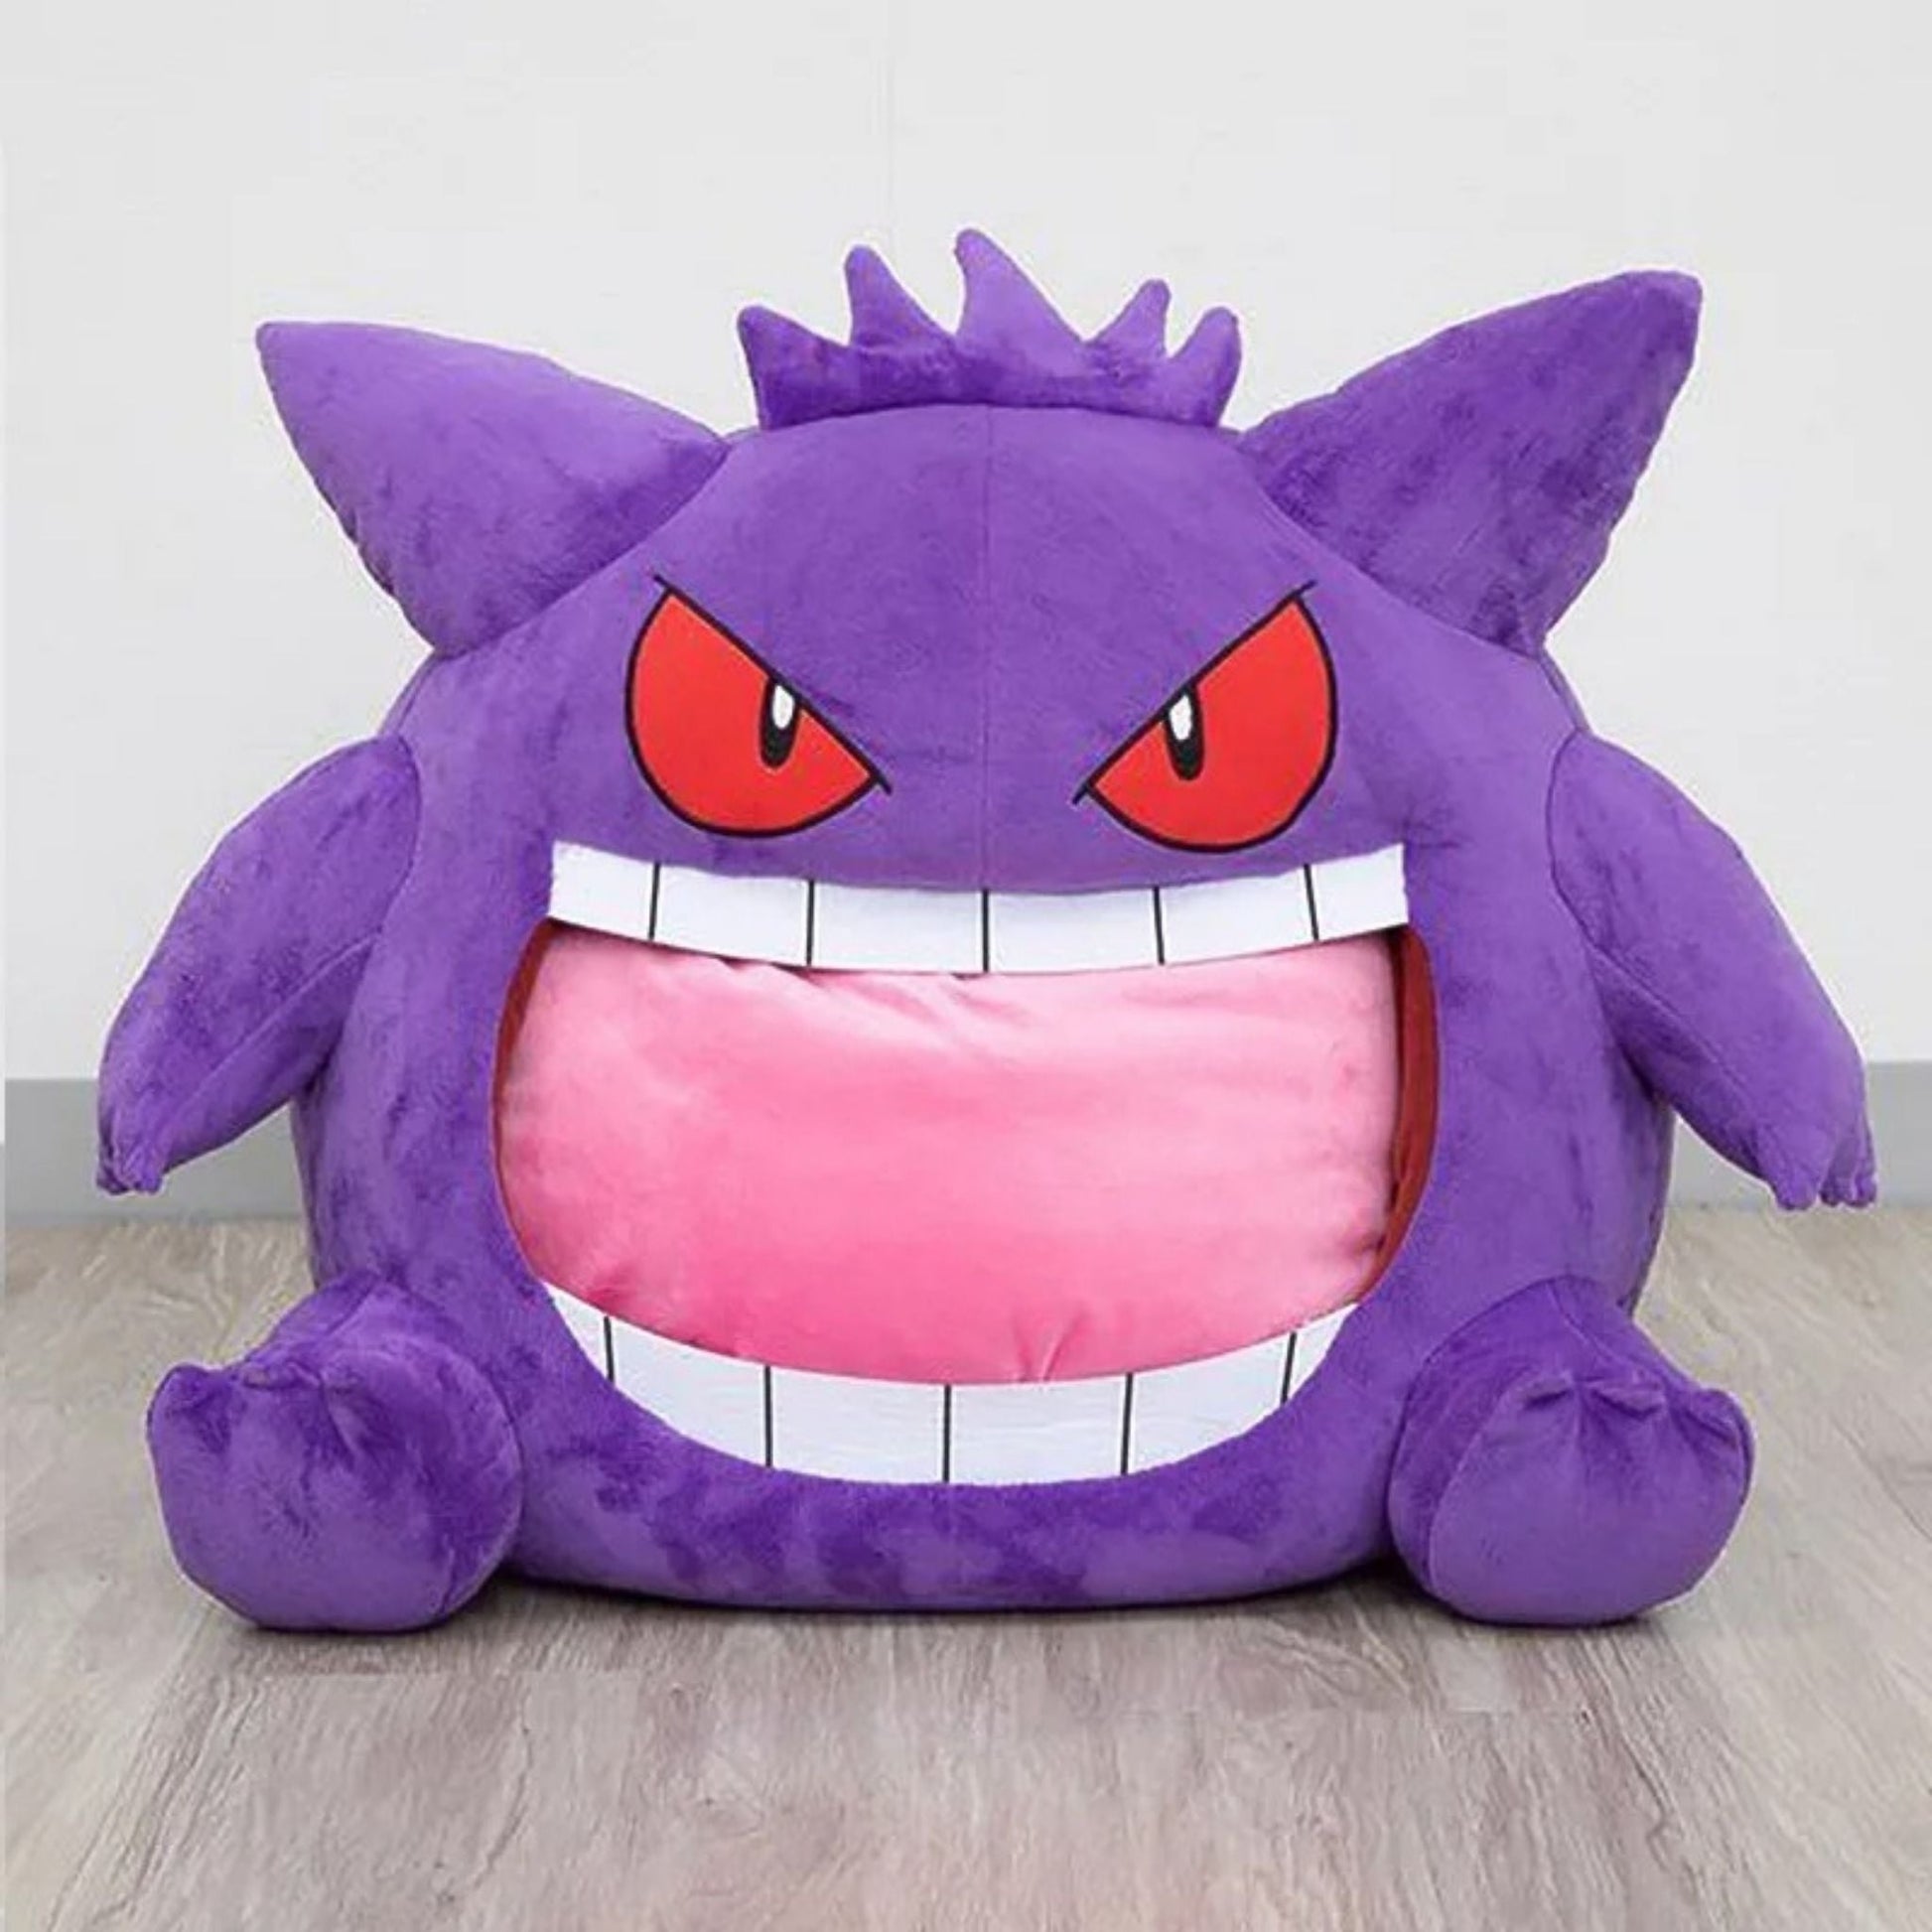 Blanket Folded In - Gengar Tongue Pillow Blanket Sleeping Pod For Afternoon Naps. Portable design for travel, work and on the go napping. Perfect gift for Pokémon fans.